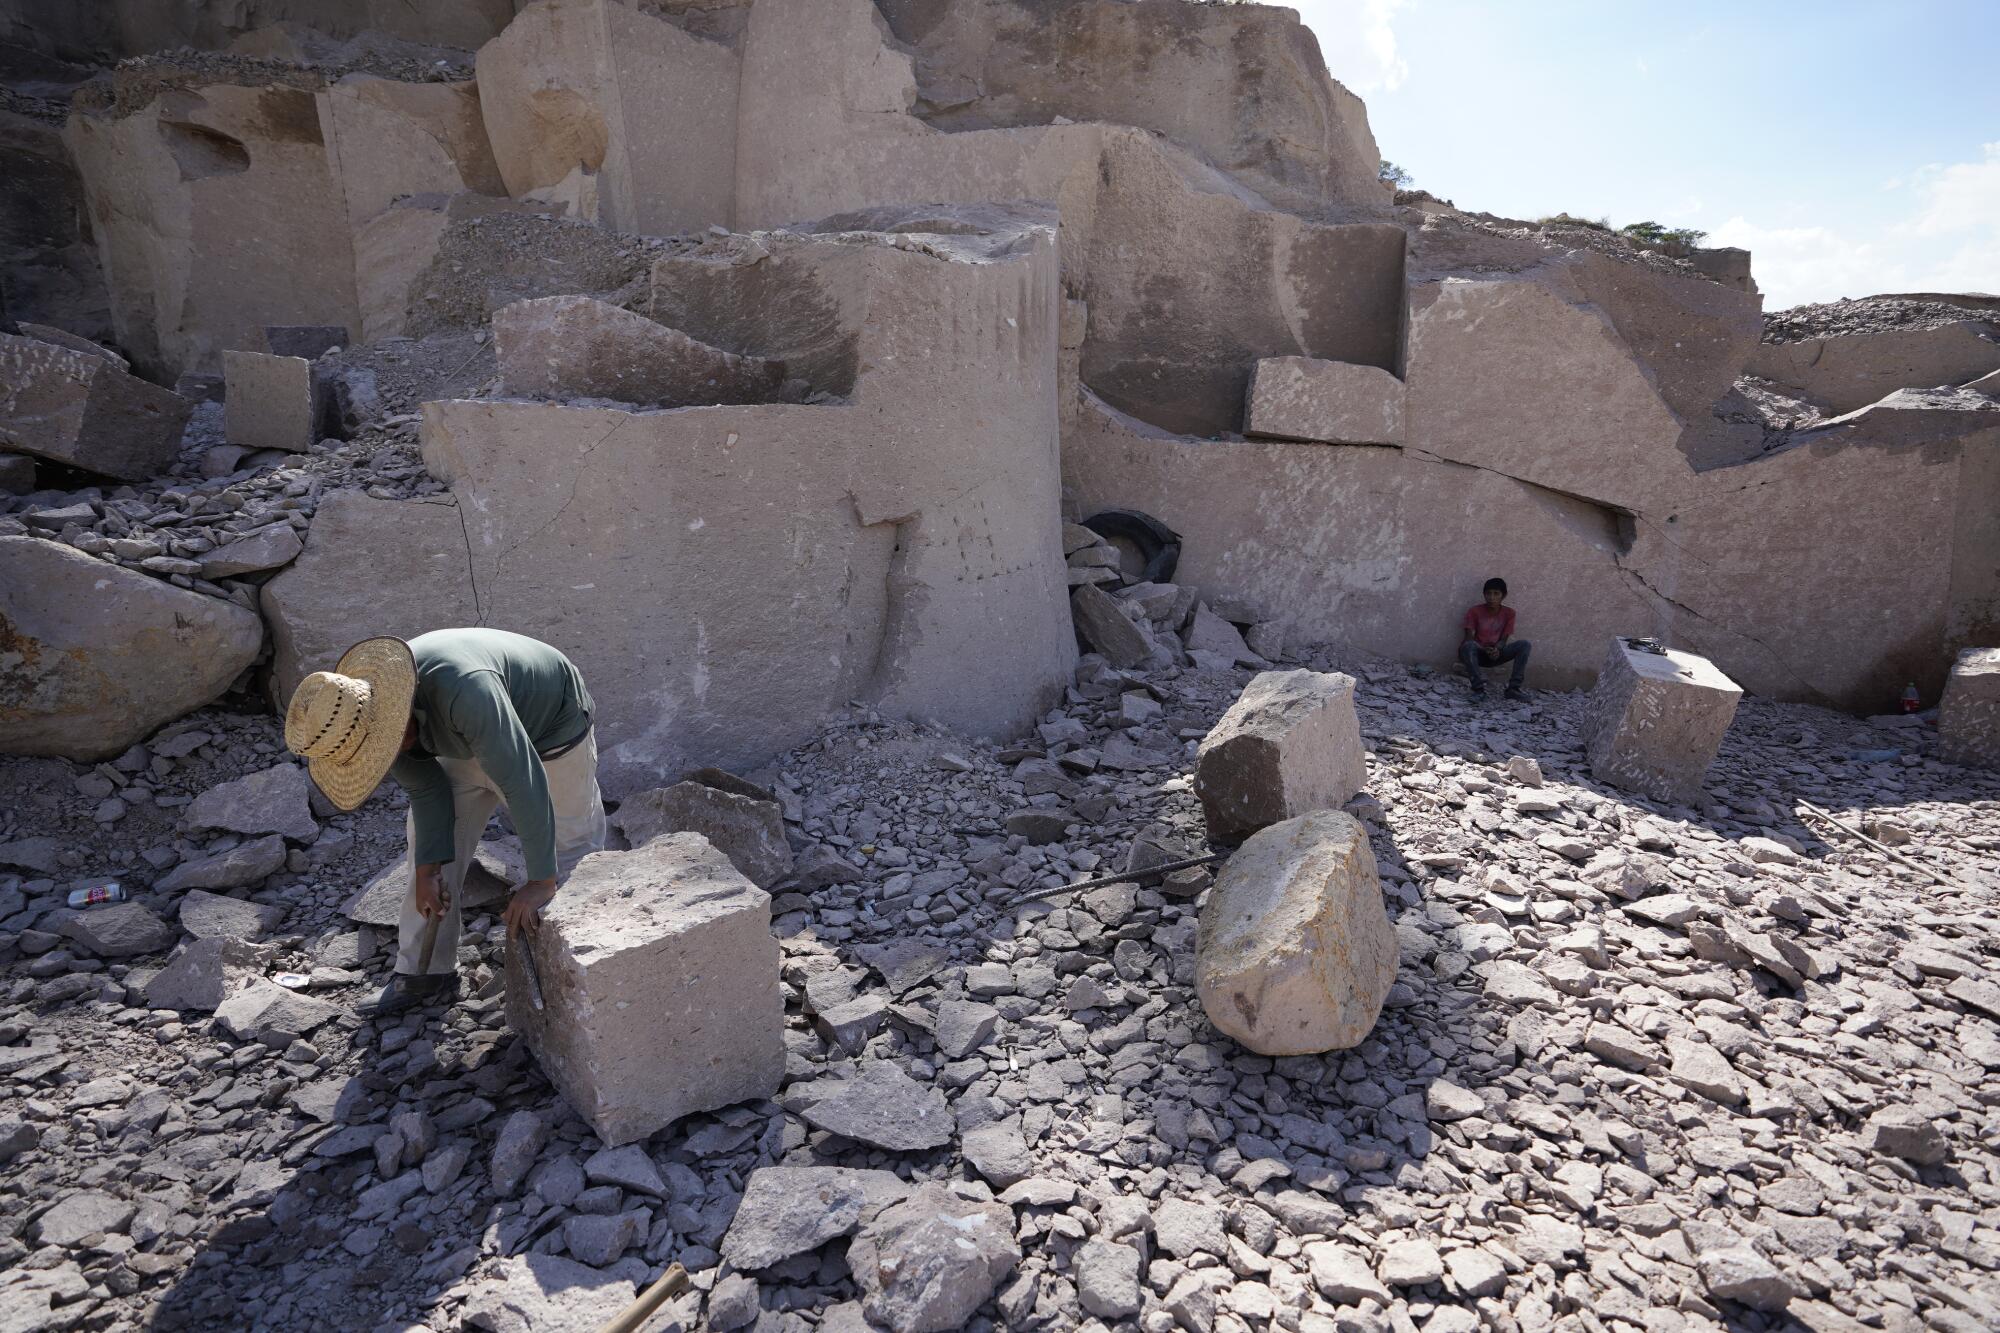 A man works chiseling rocks all day at quarry near the town of El Rincón de San Ildefonso on Thursday.